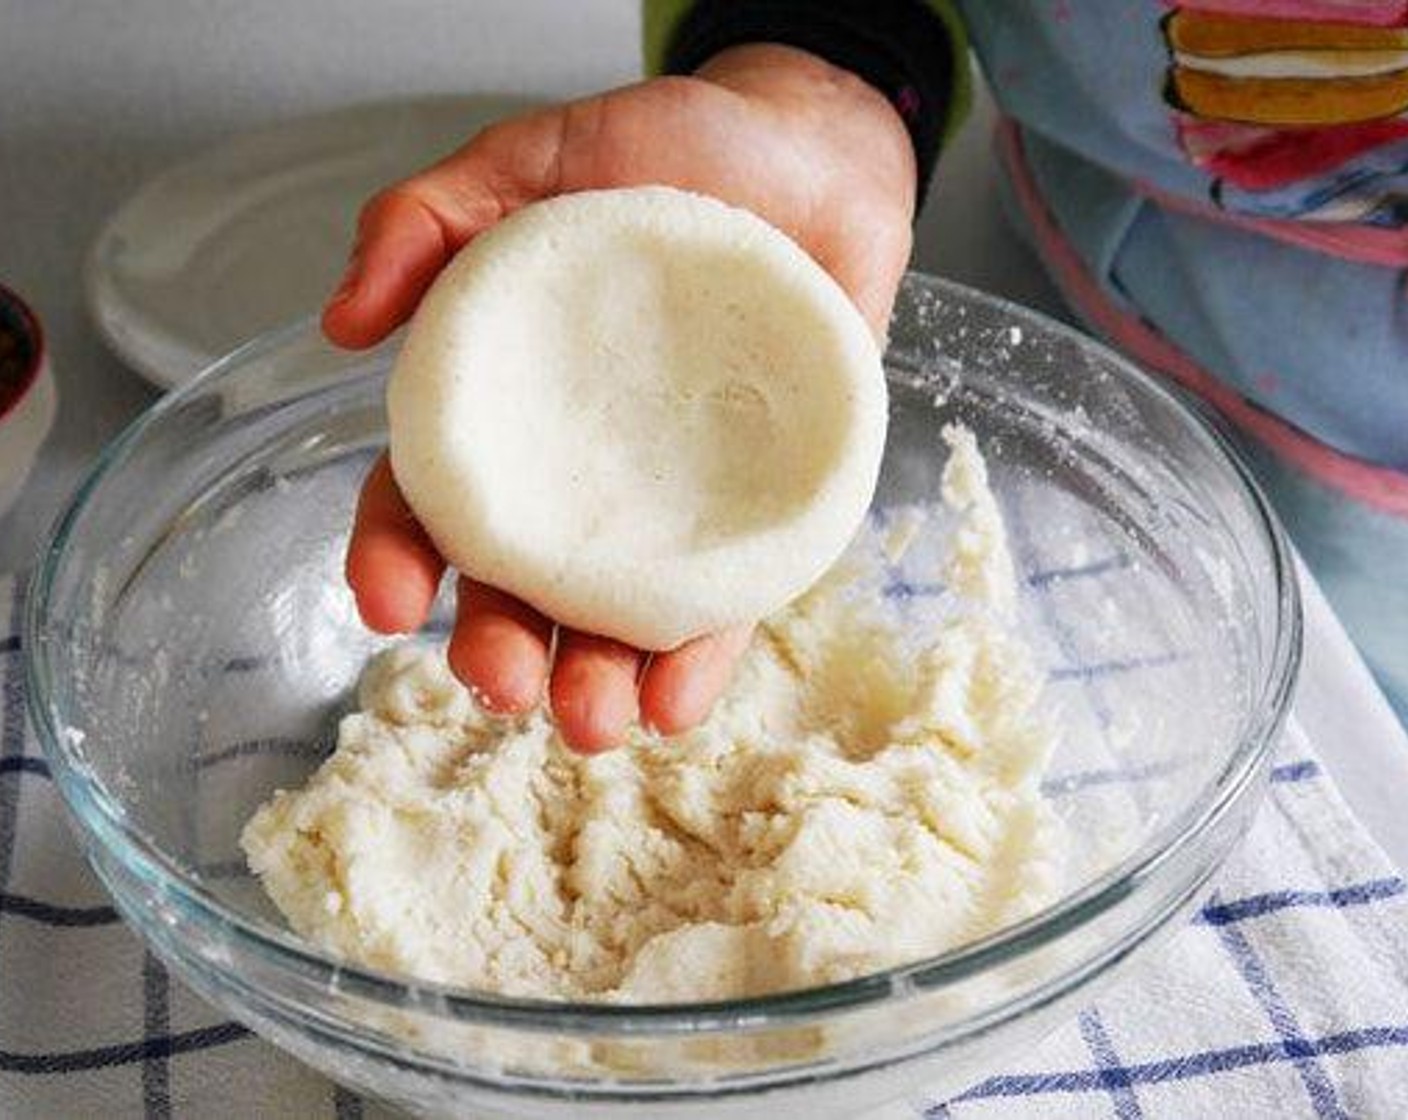 step 1 In a bowl add the P.A.N.® Harina Flour (2 cups), Salt (1 tsp), and Water (3 cups). Kneed until the dough is unified and smooth. Once the dough is soft make each ball at a time. With your finger start to create a whole in the middle of the ball to fit the filling.